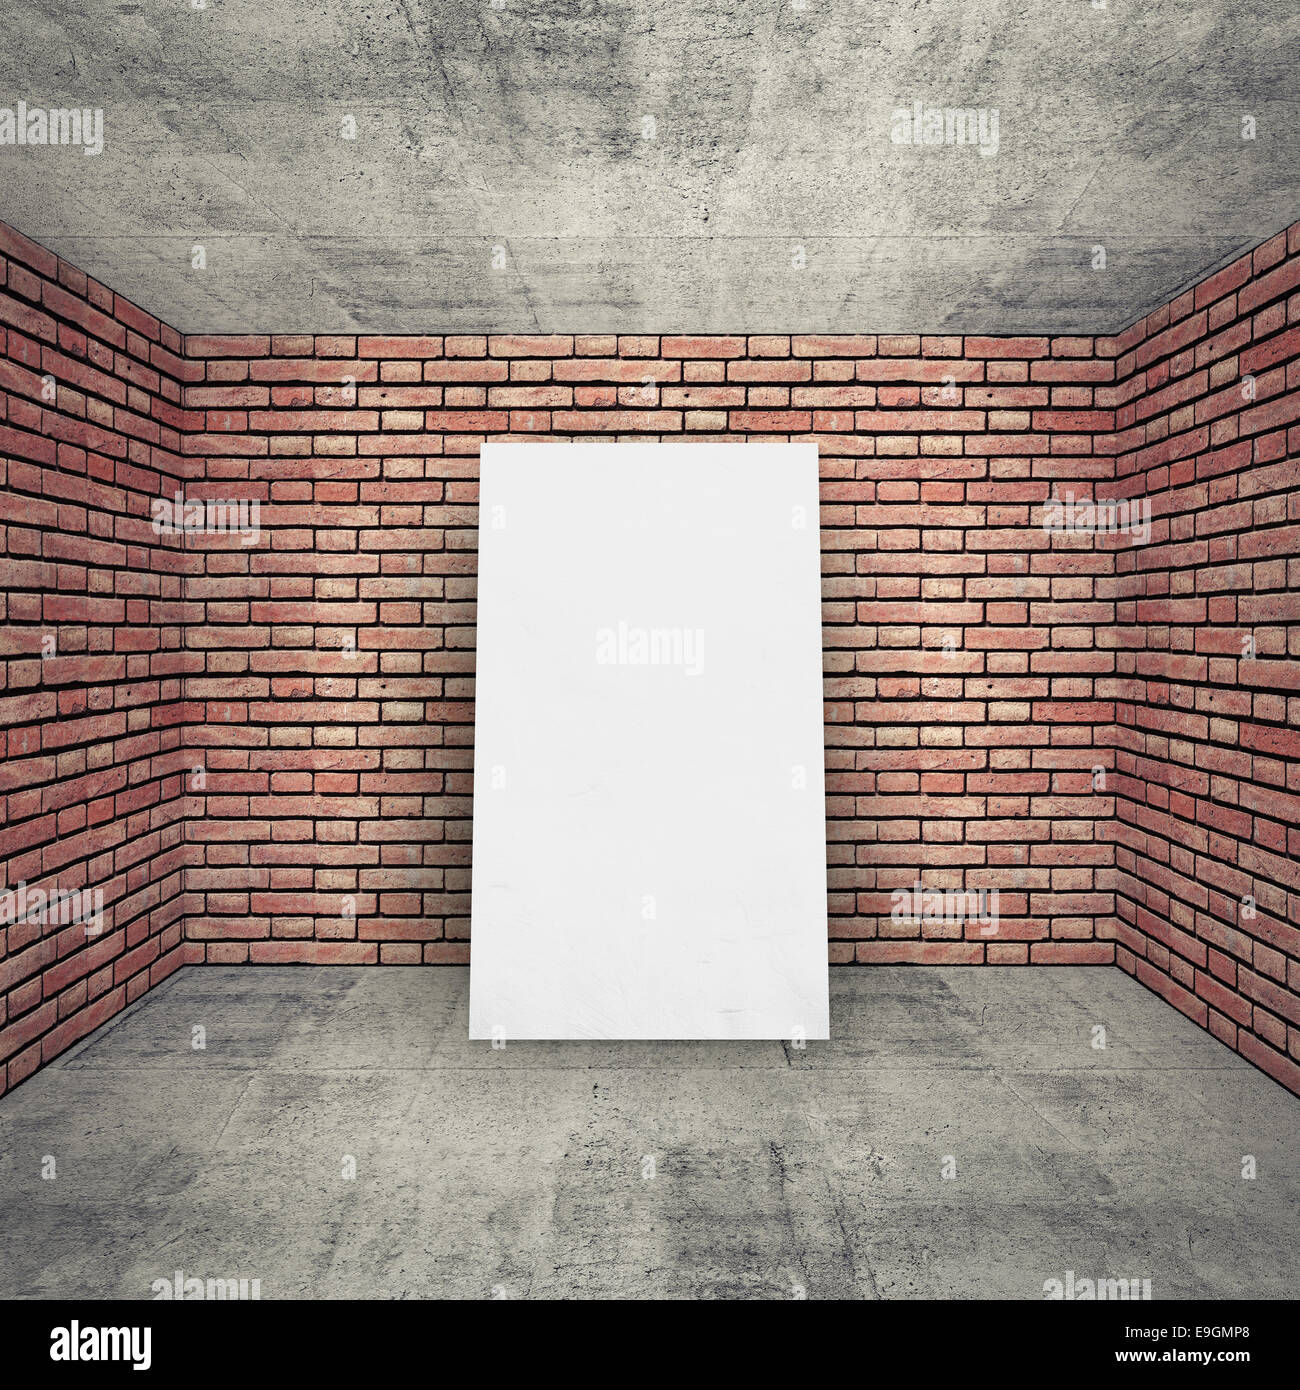 White blank banner in empty room interior with brick walls and concrete floor. Square 3d background Stock Photo